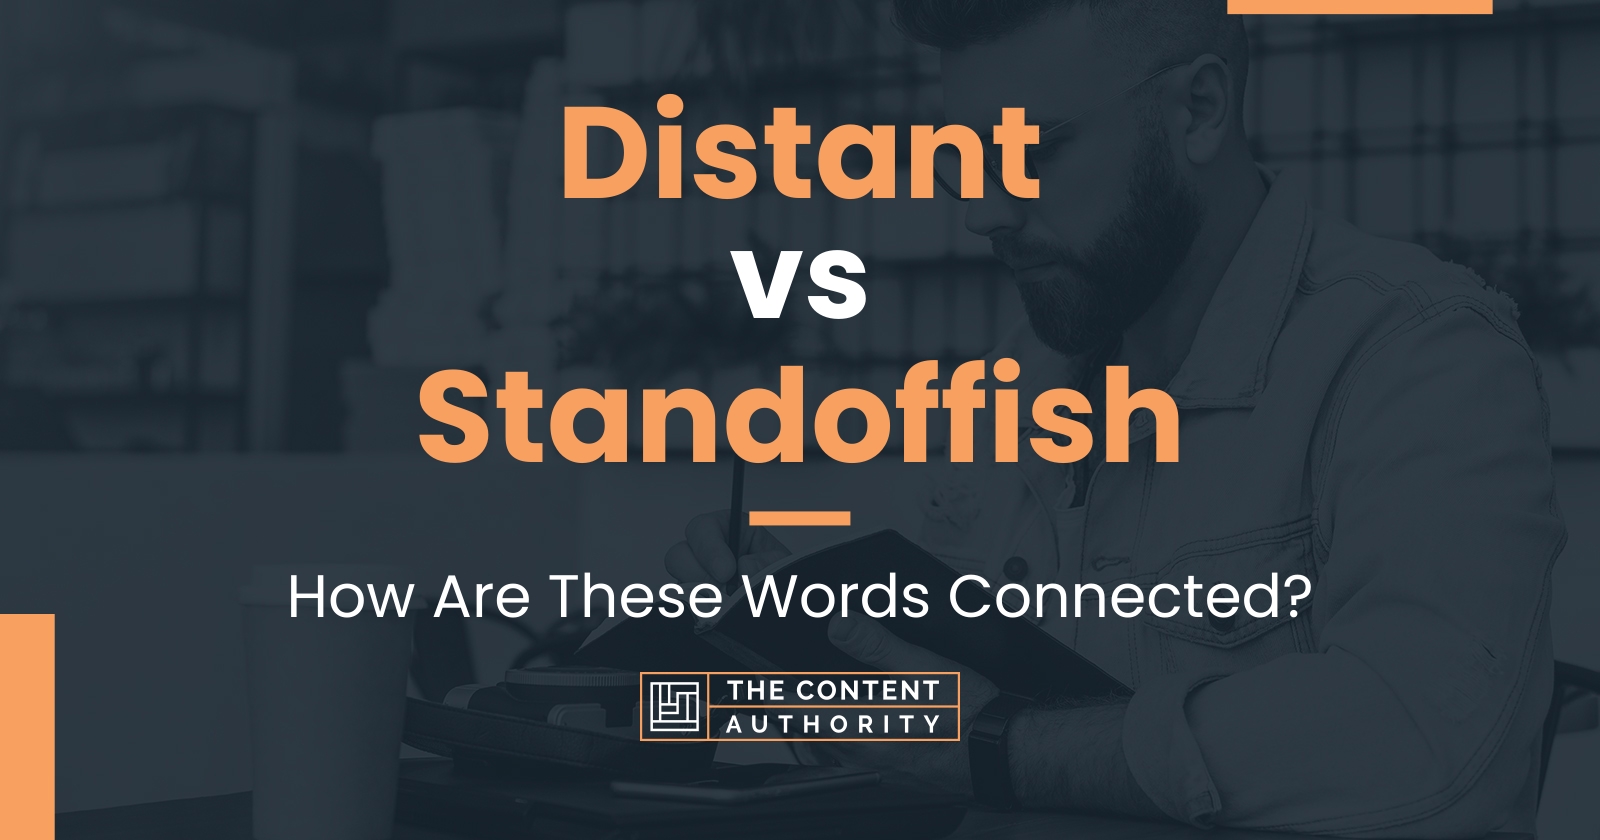 Distant vs Standoffish: How Are These Words Connected?